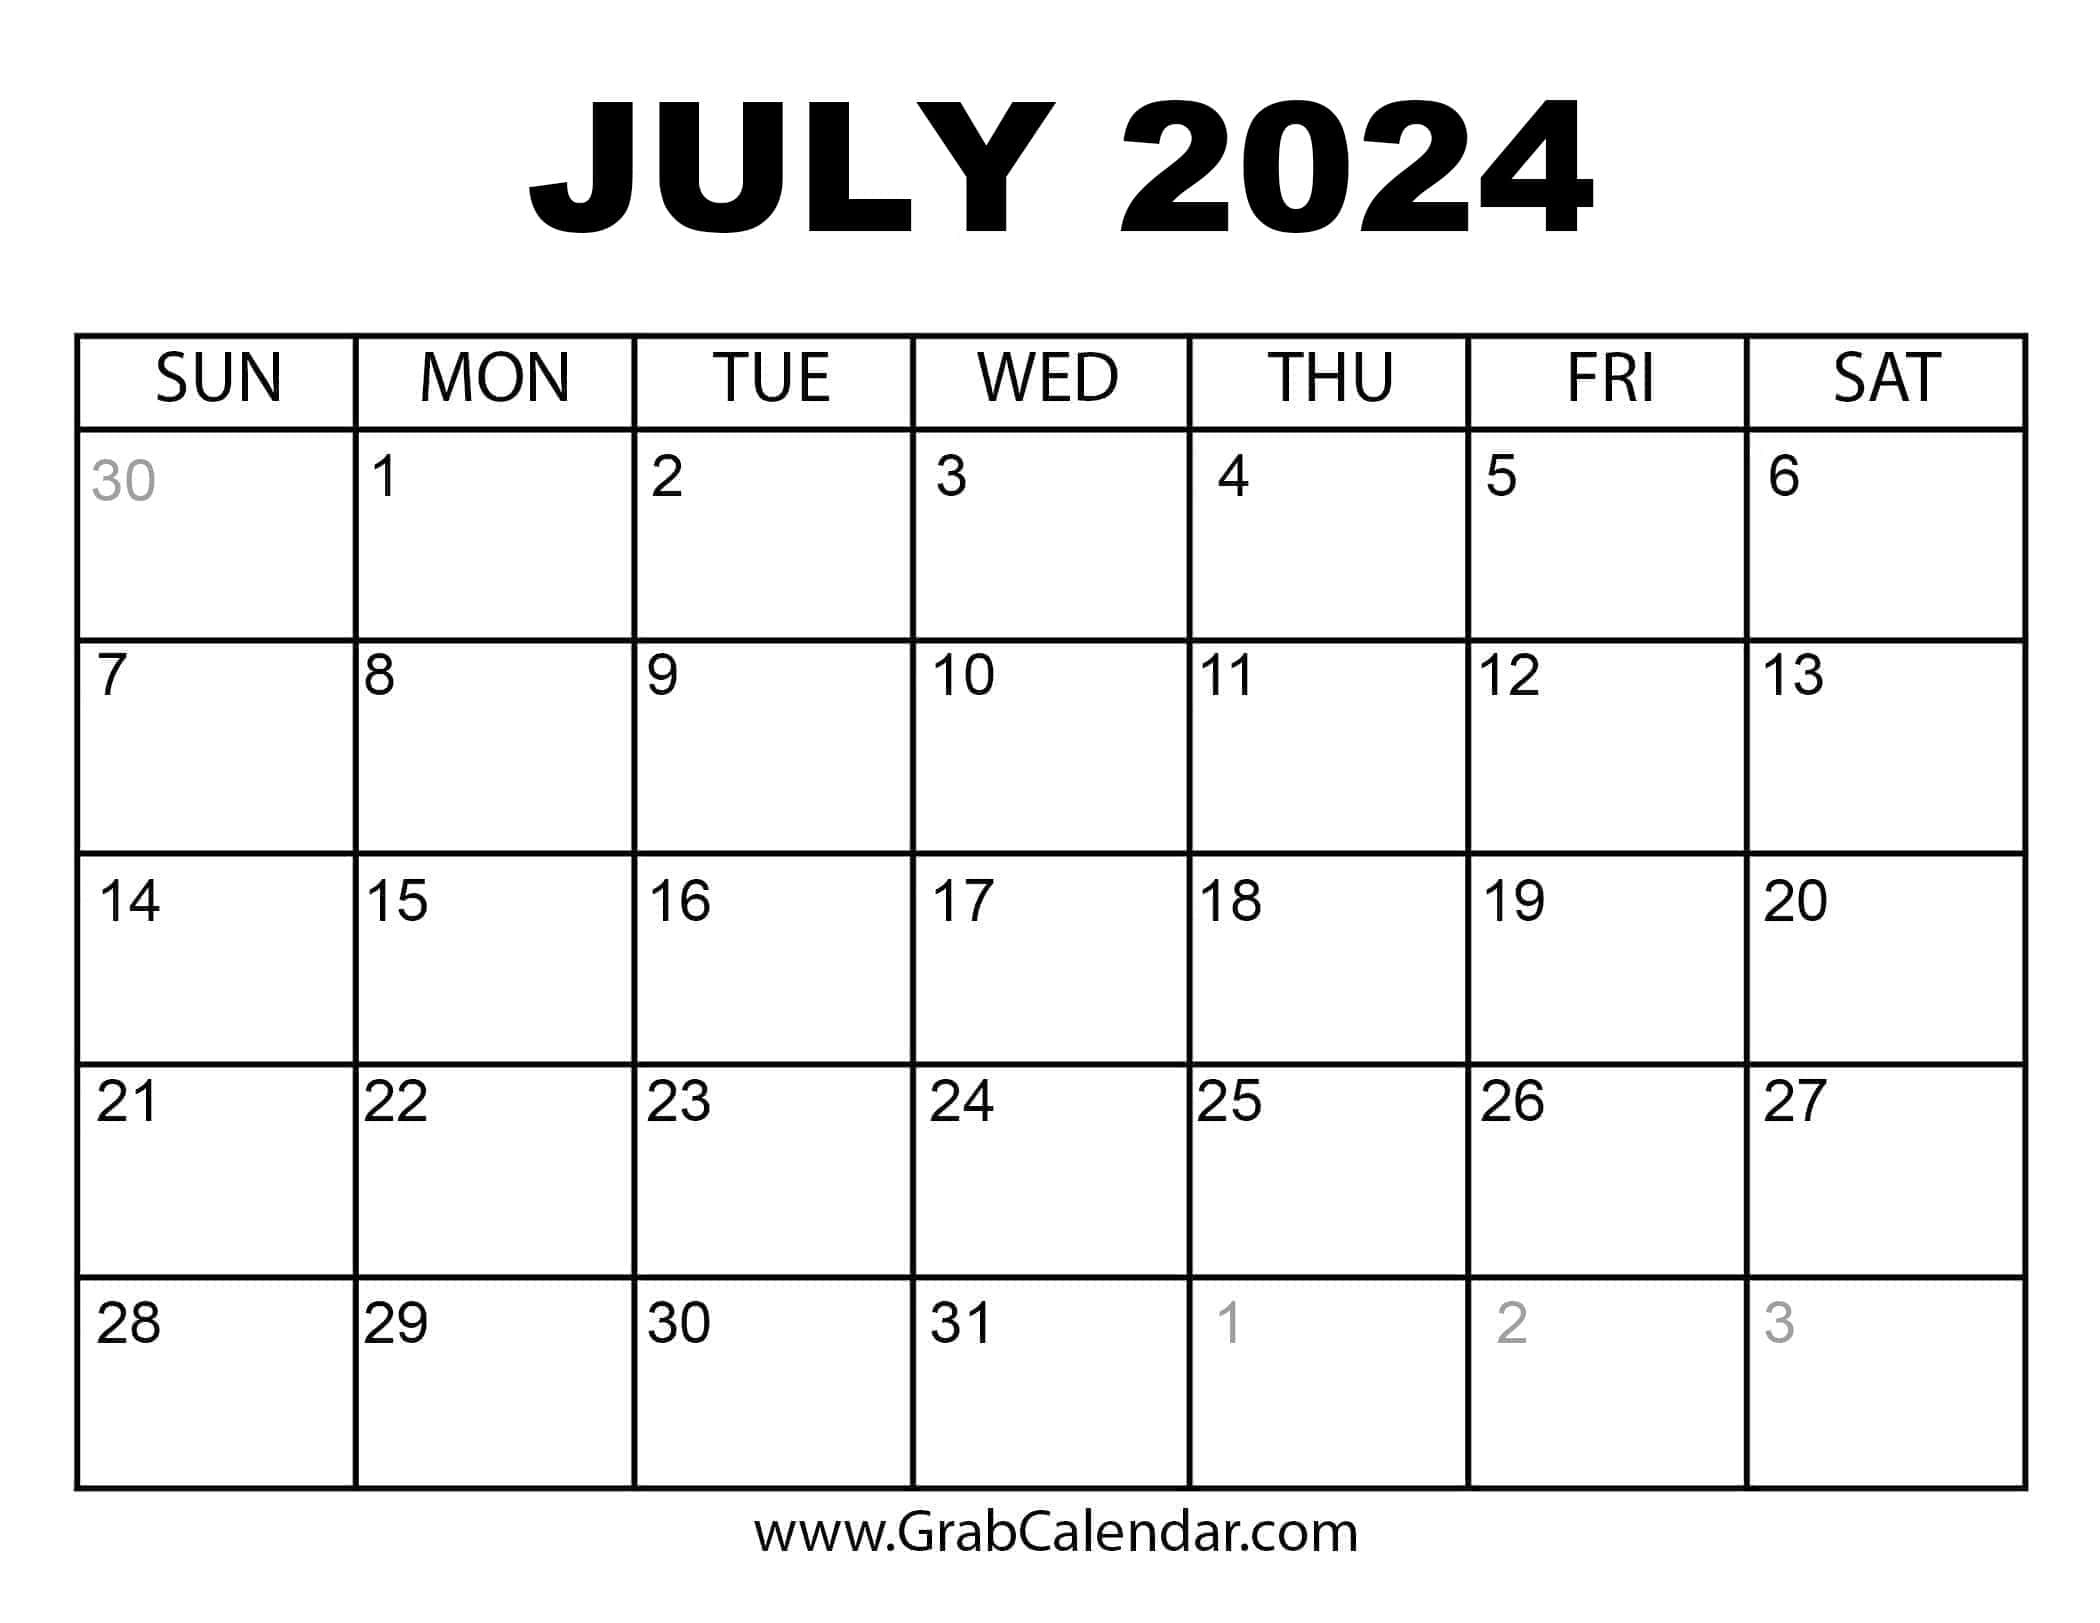 Printable July 2024 Calendar pertaining to July Calendar Important Dates 2024